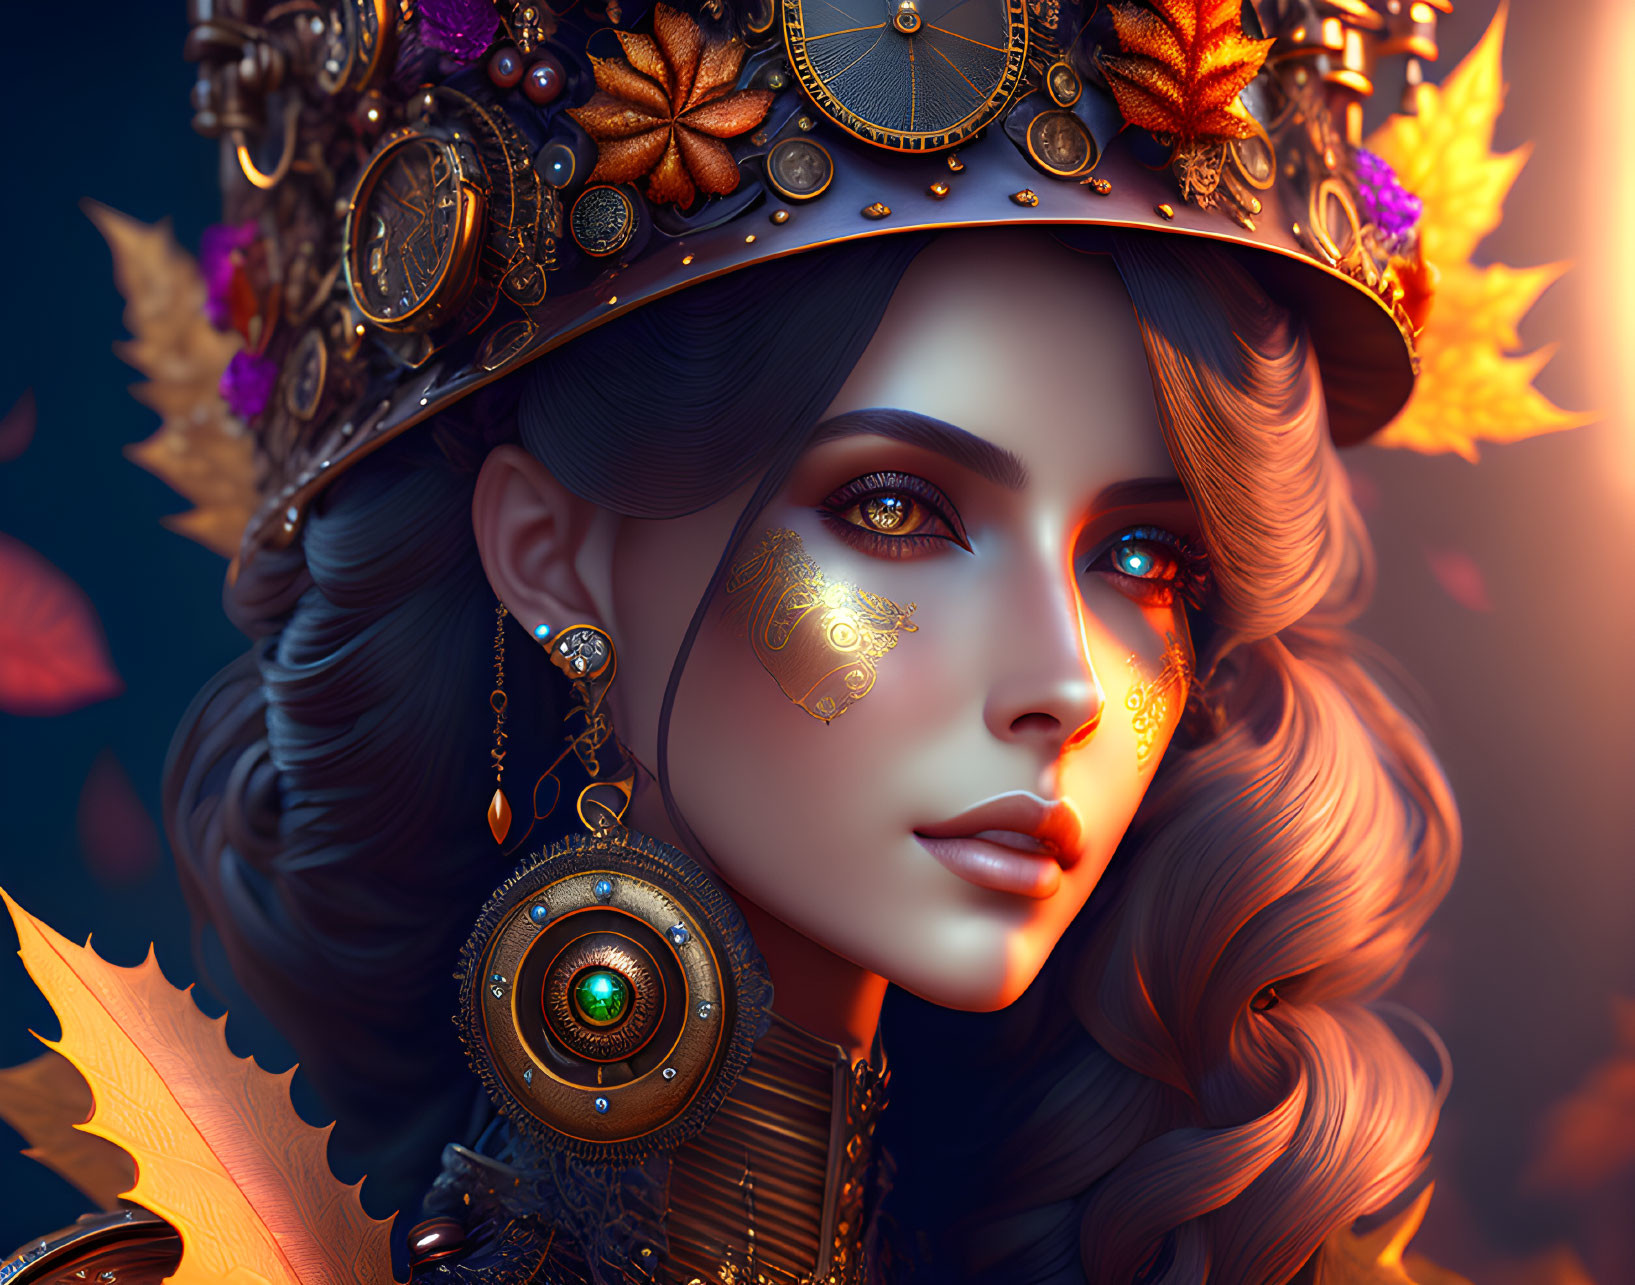 Detailed digital artwork featuring woman in ornate headgear with autumn leaves.